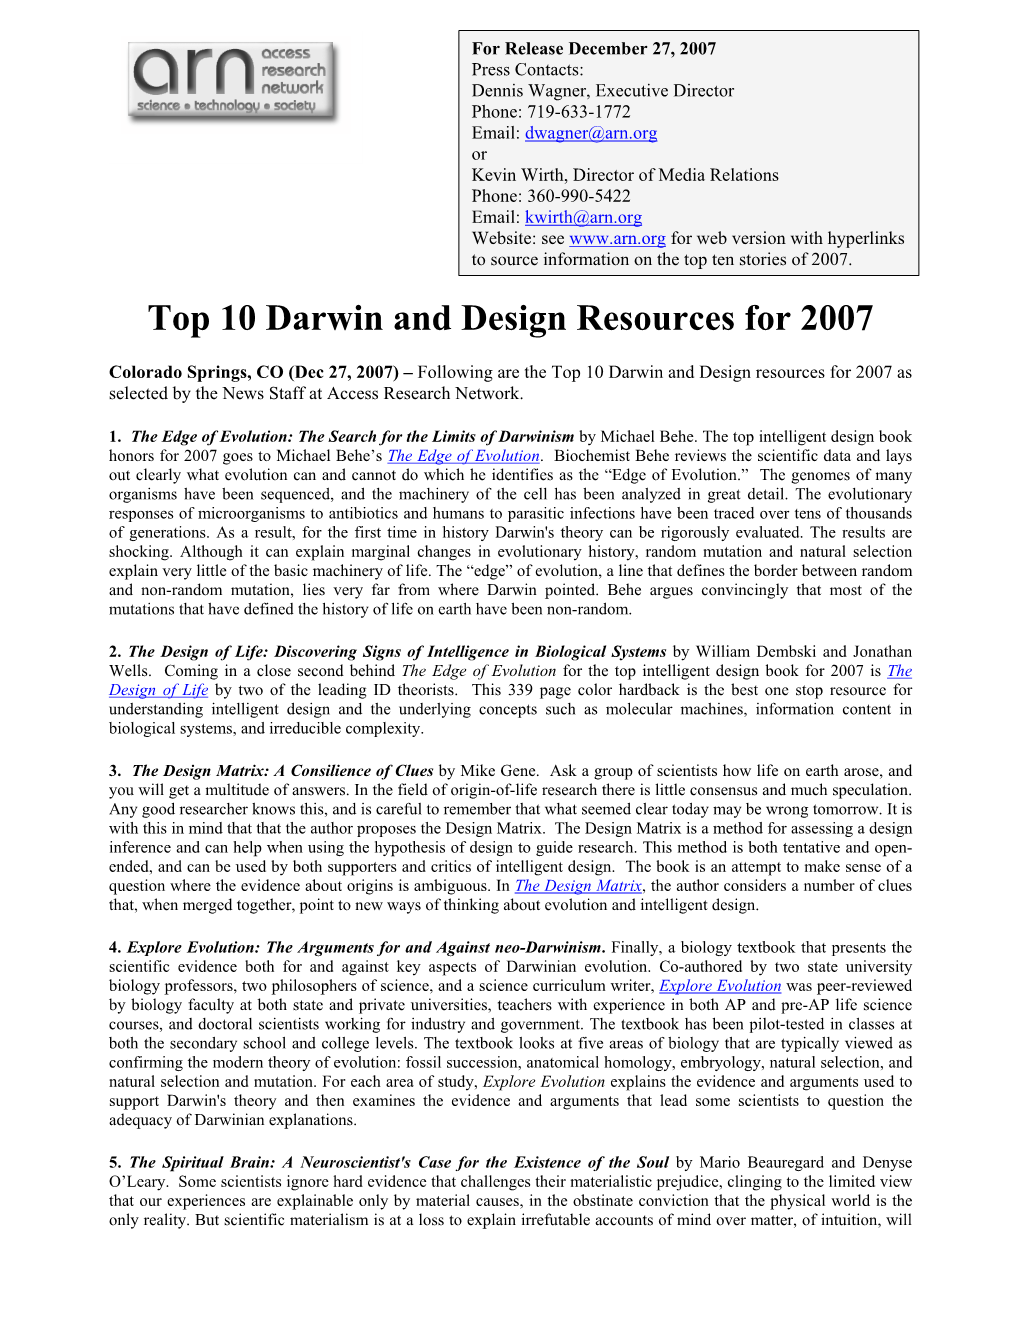 Top 10 Darwin and Design Resources for 2007